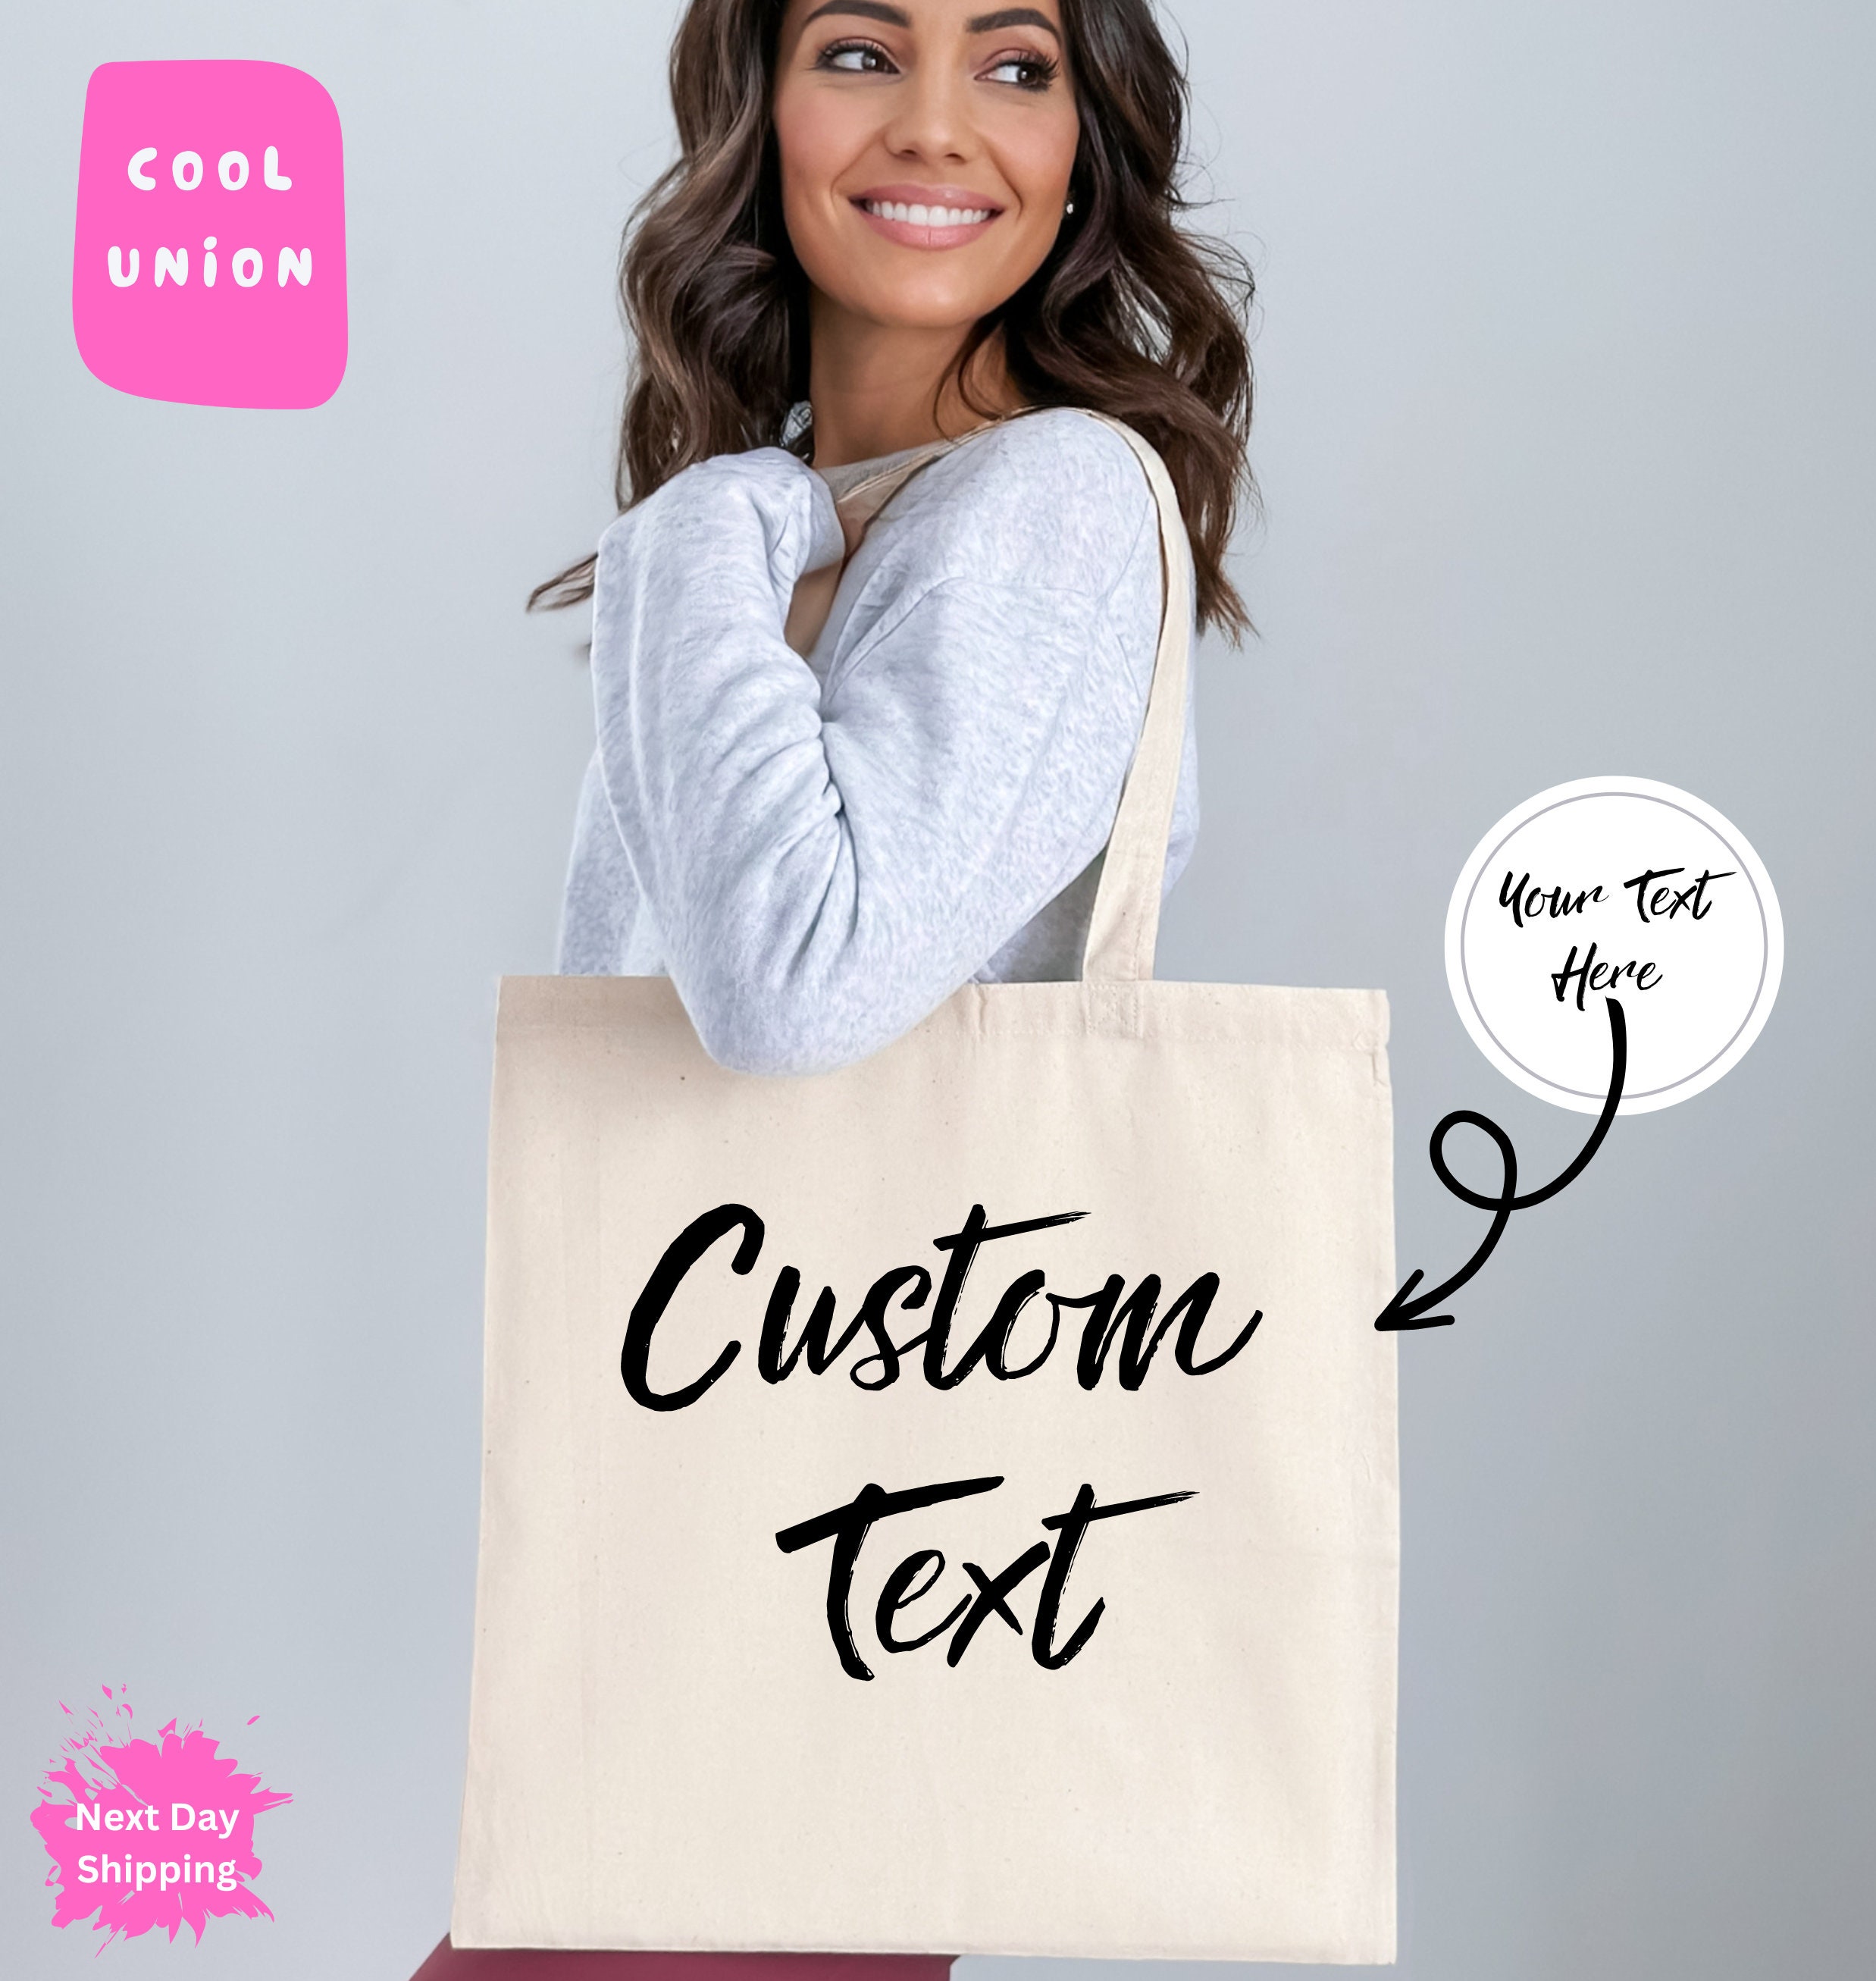 Personalized Tote Bag for Women Gift - 17 Vinyl Color - Customized Canvas  Beach Bags for Girl - Custom Shoulder Bags w/Pocket - Large Grocery Bags 